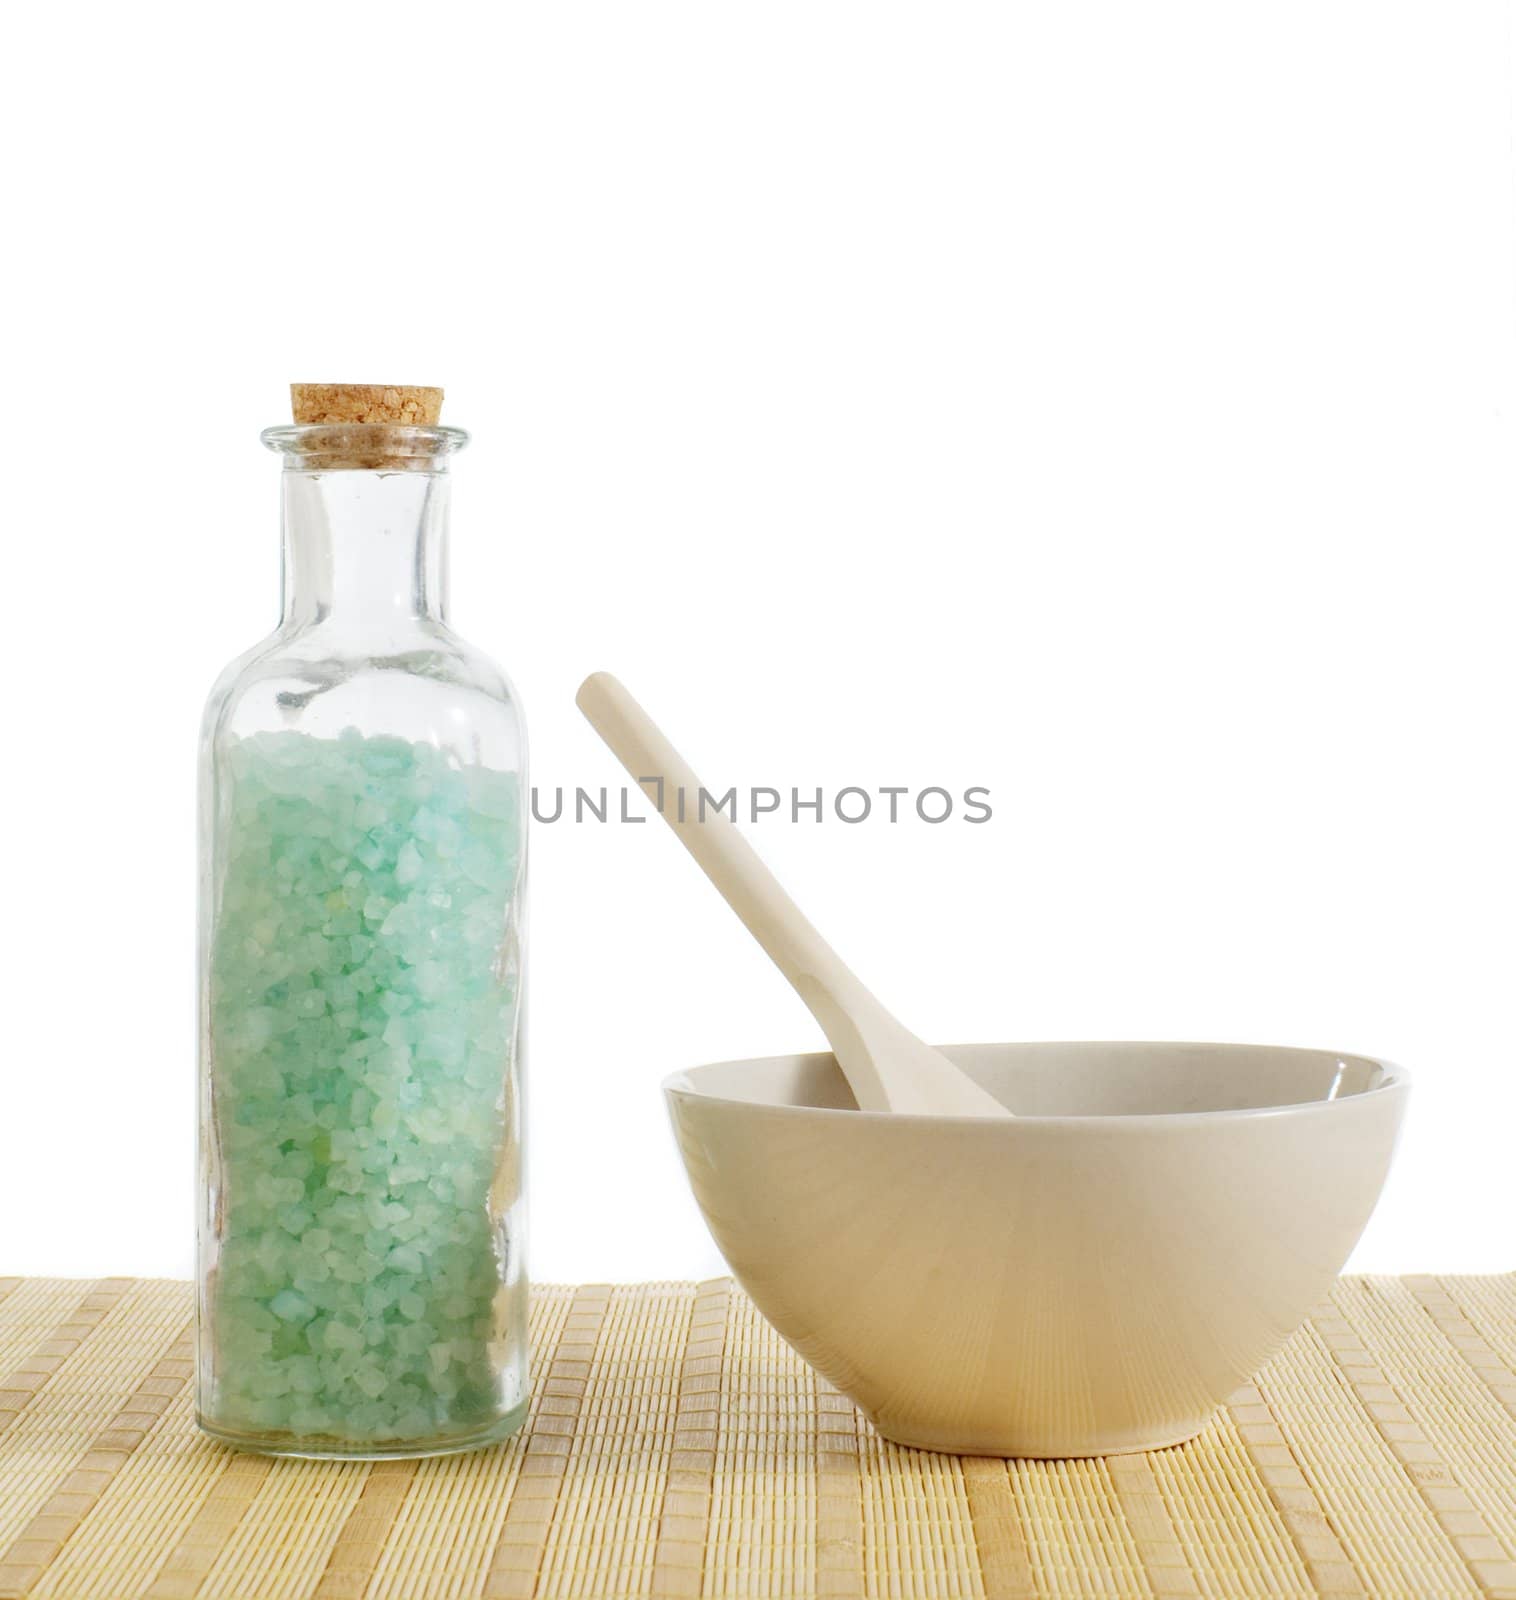 Bottle of salt and bowl of treatment against a white background.